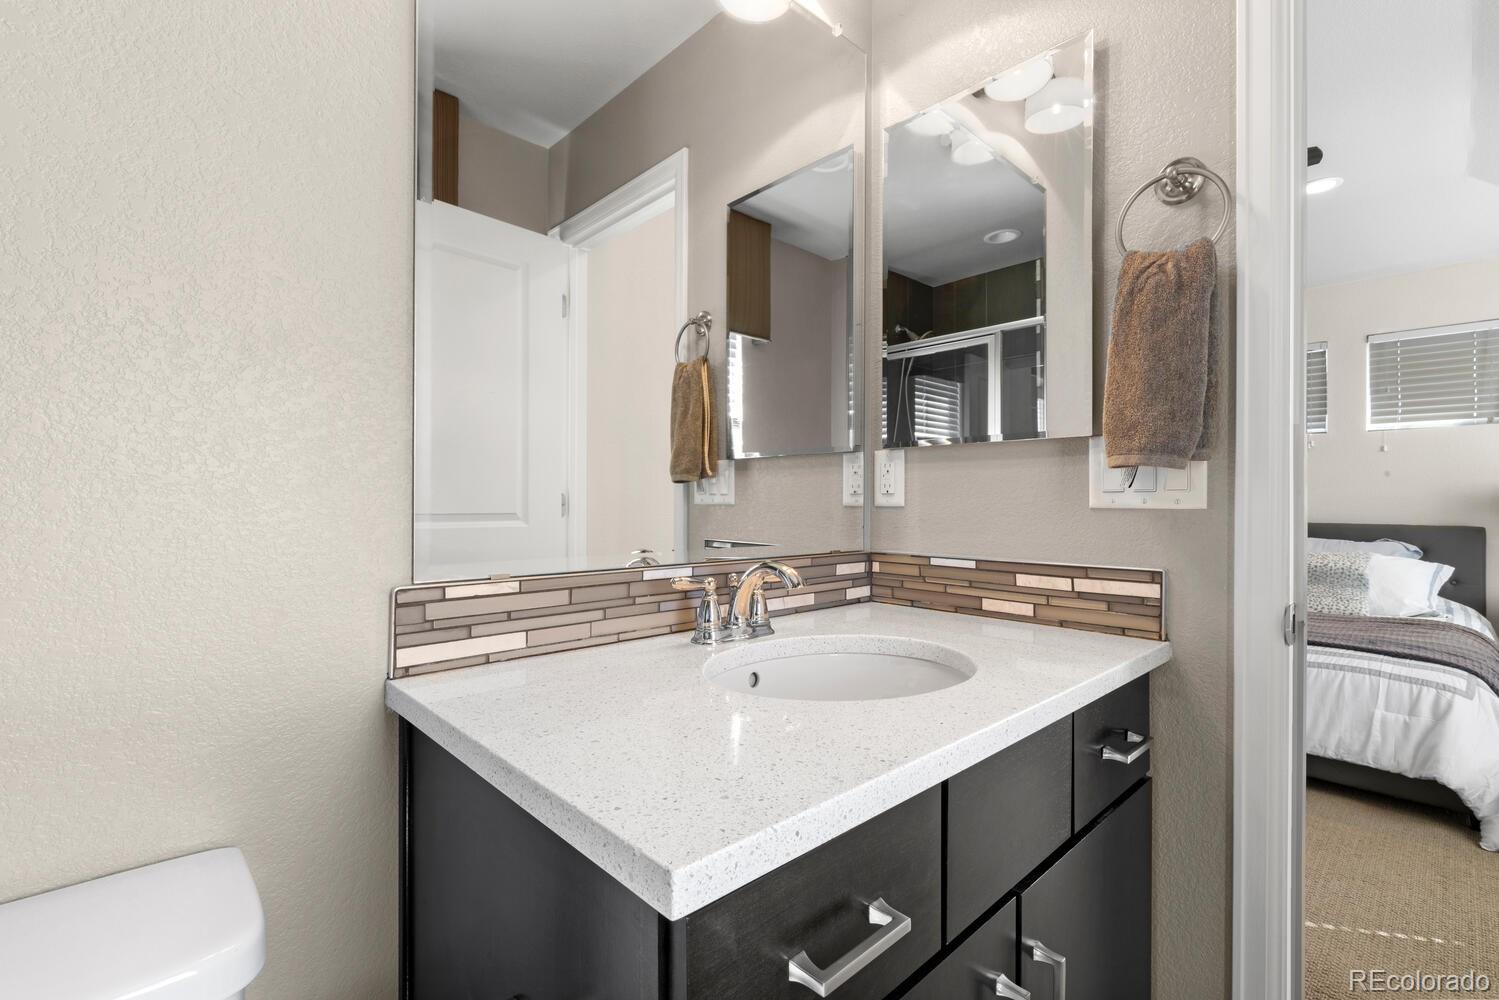 Primary bath with model home finishes.